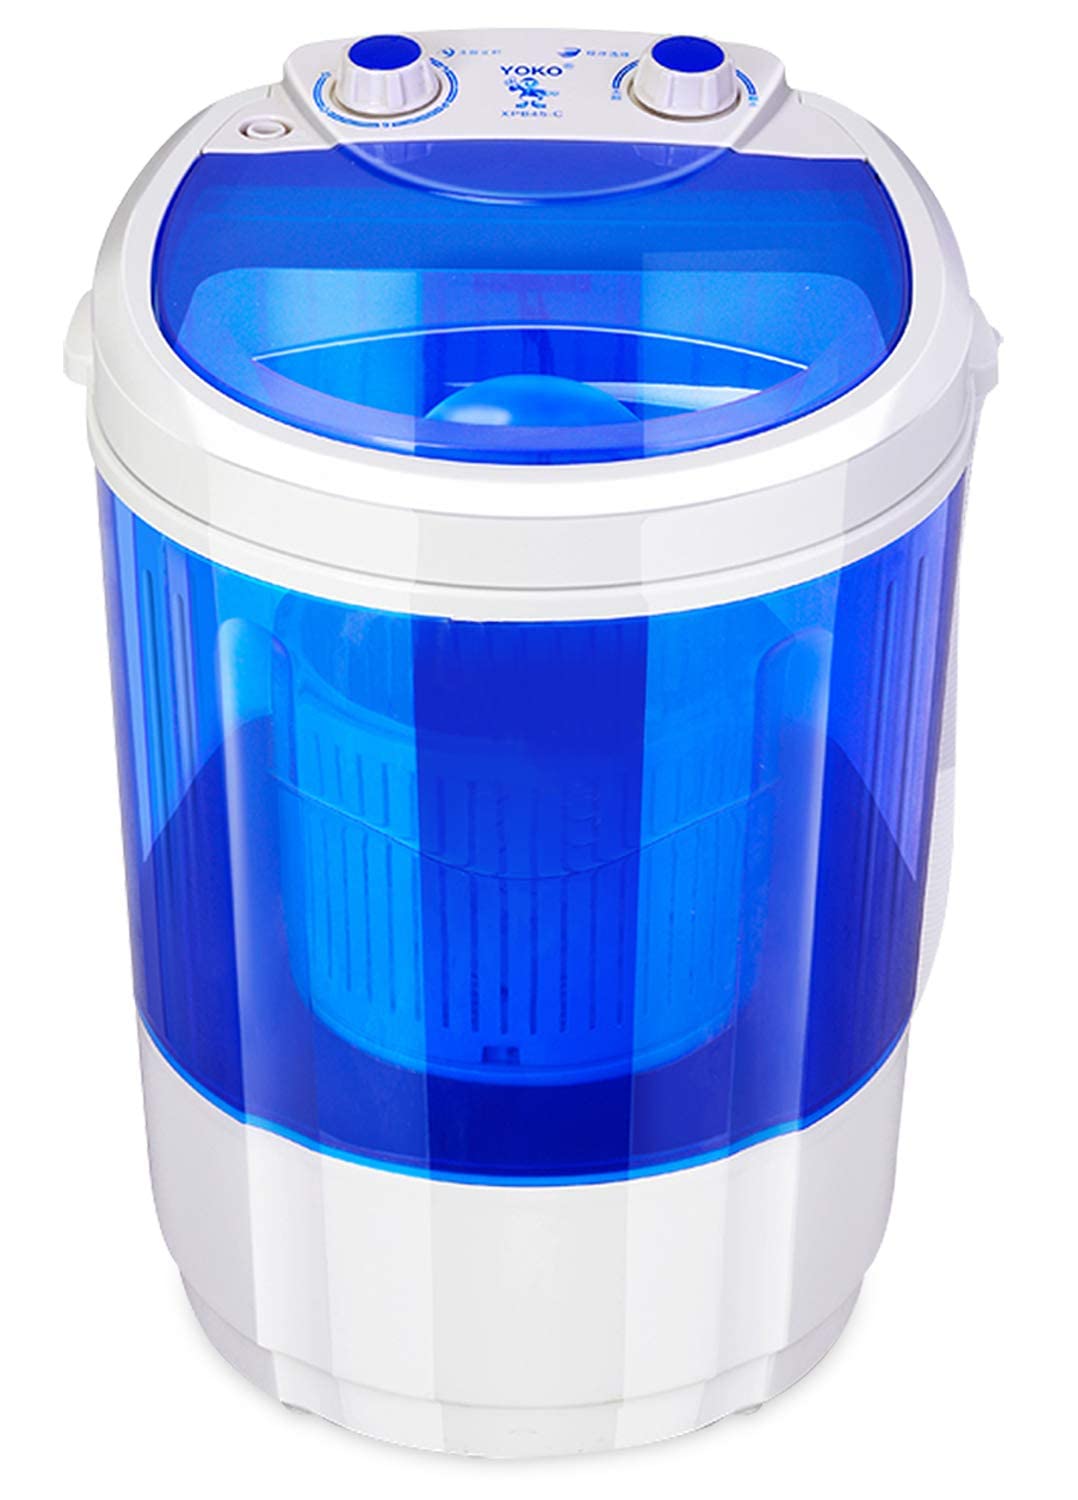 DENSORS Portable Single Tub Washer - The Laundry Alternative - Washing Capacity Less Than 1.2Kg - Portable Clothes Washer For Small Clothes Like Socks, Undergarments Etc - Travel Washing Machine  - Very Good